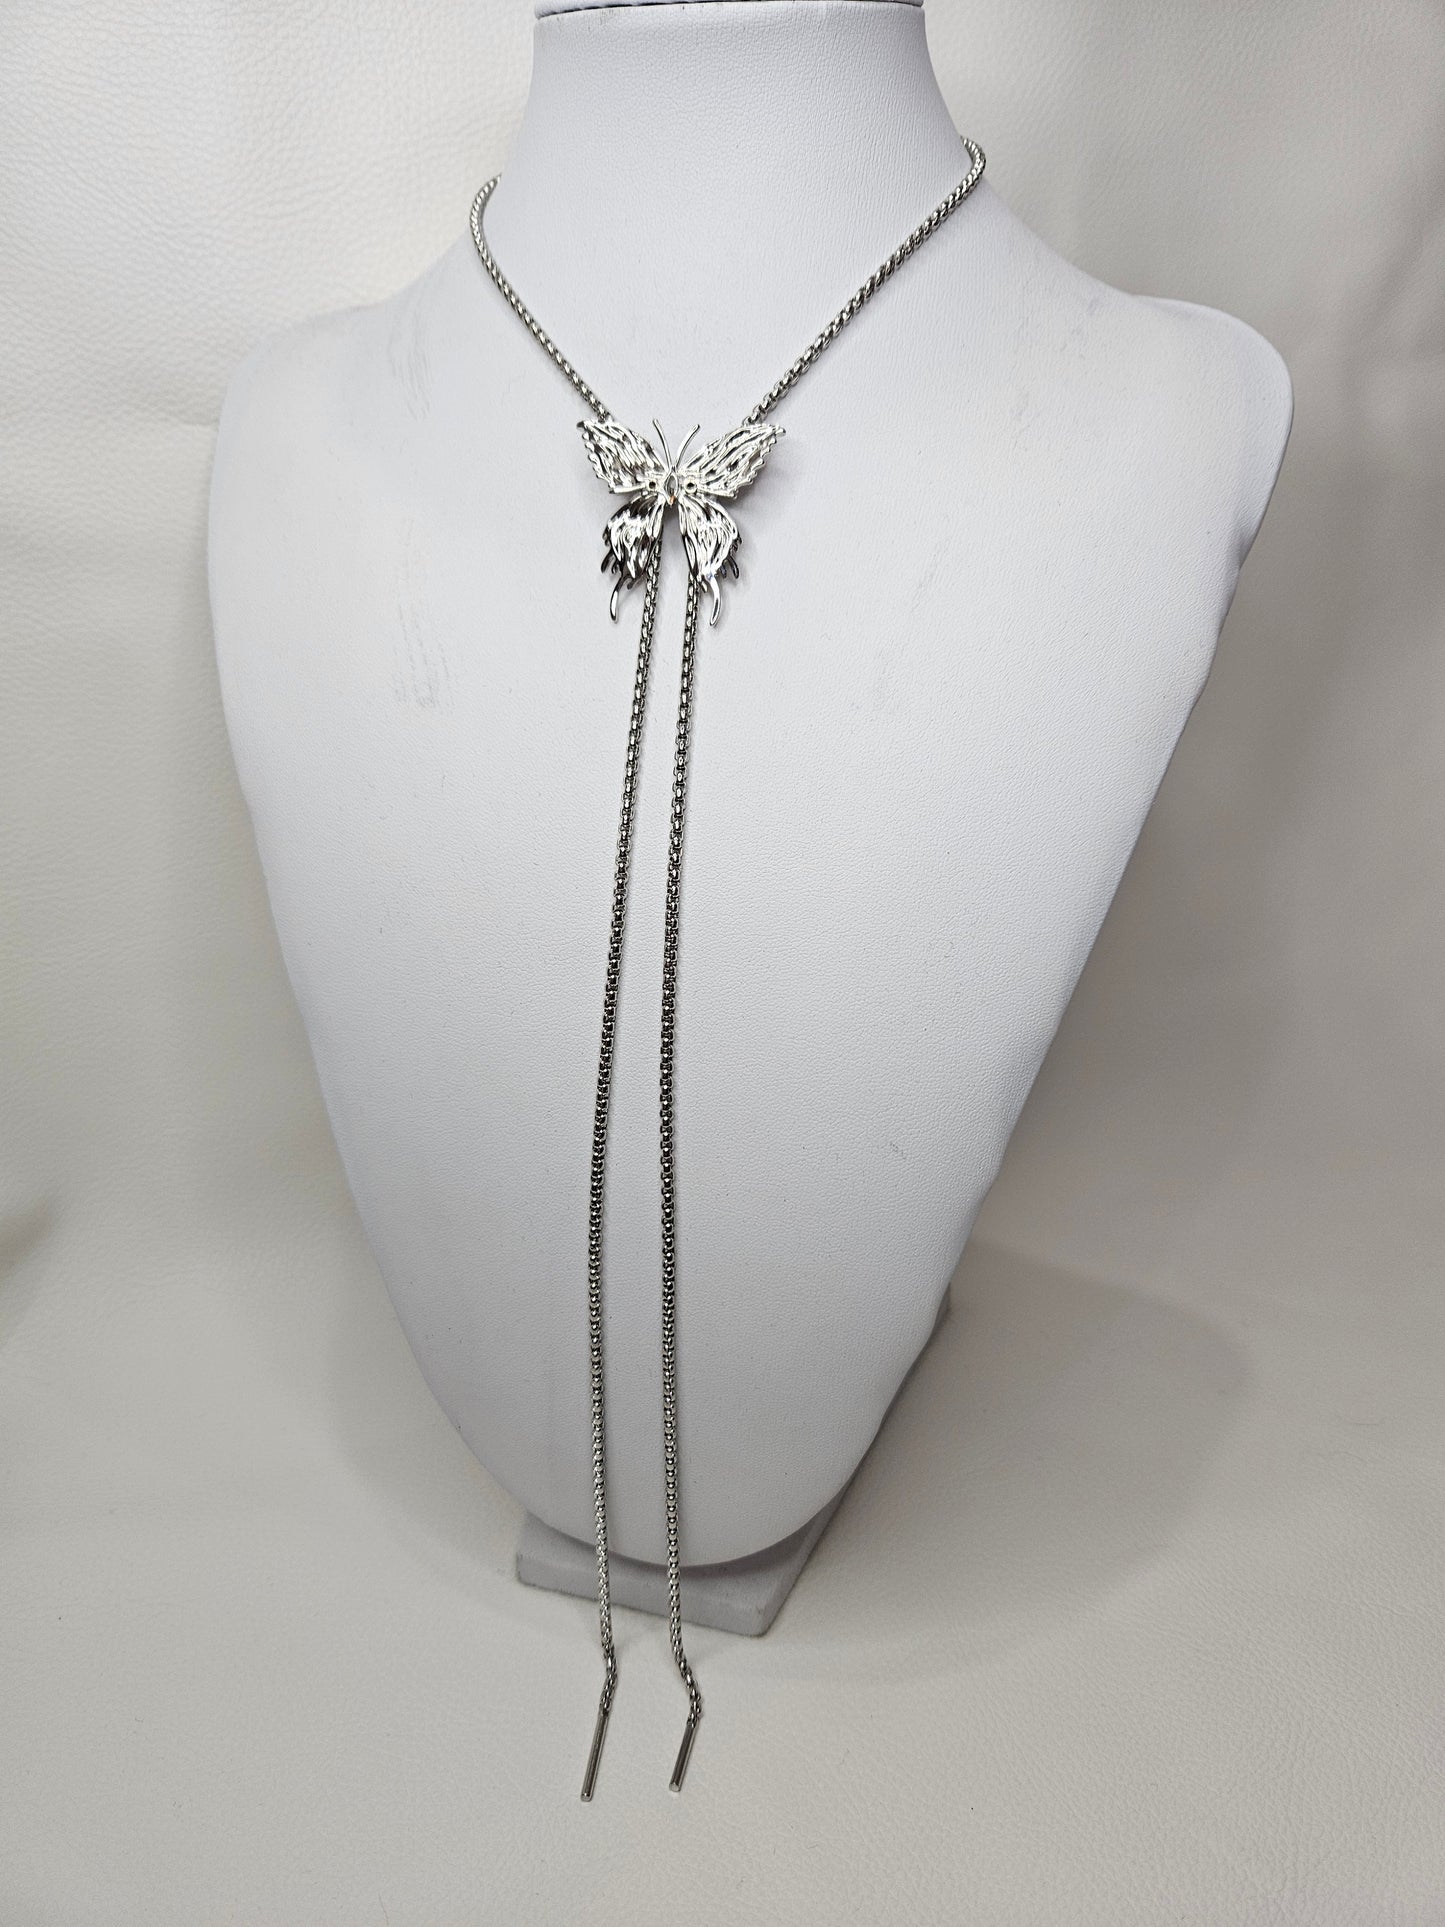 1st XULIE Butterfly 18k Platinum Plated Neck Bolo